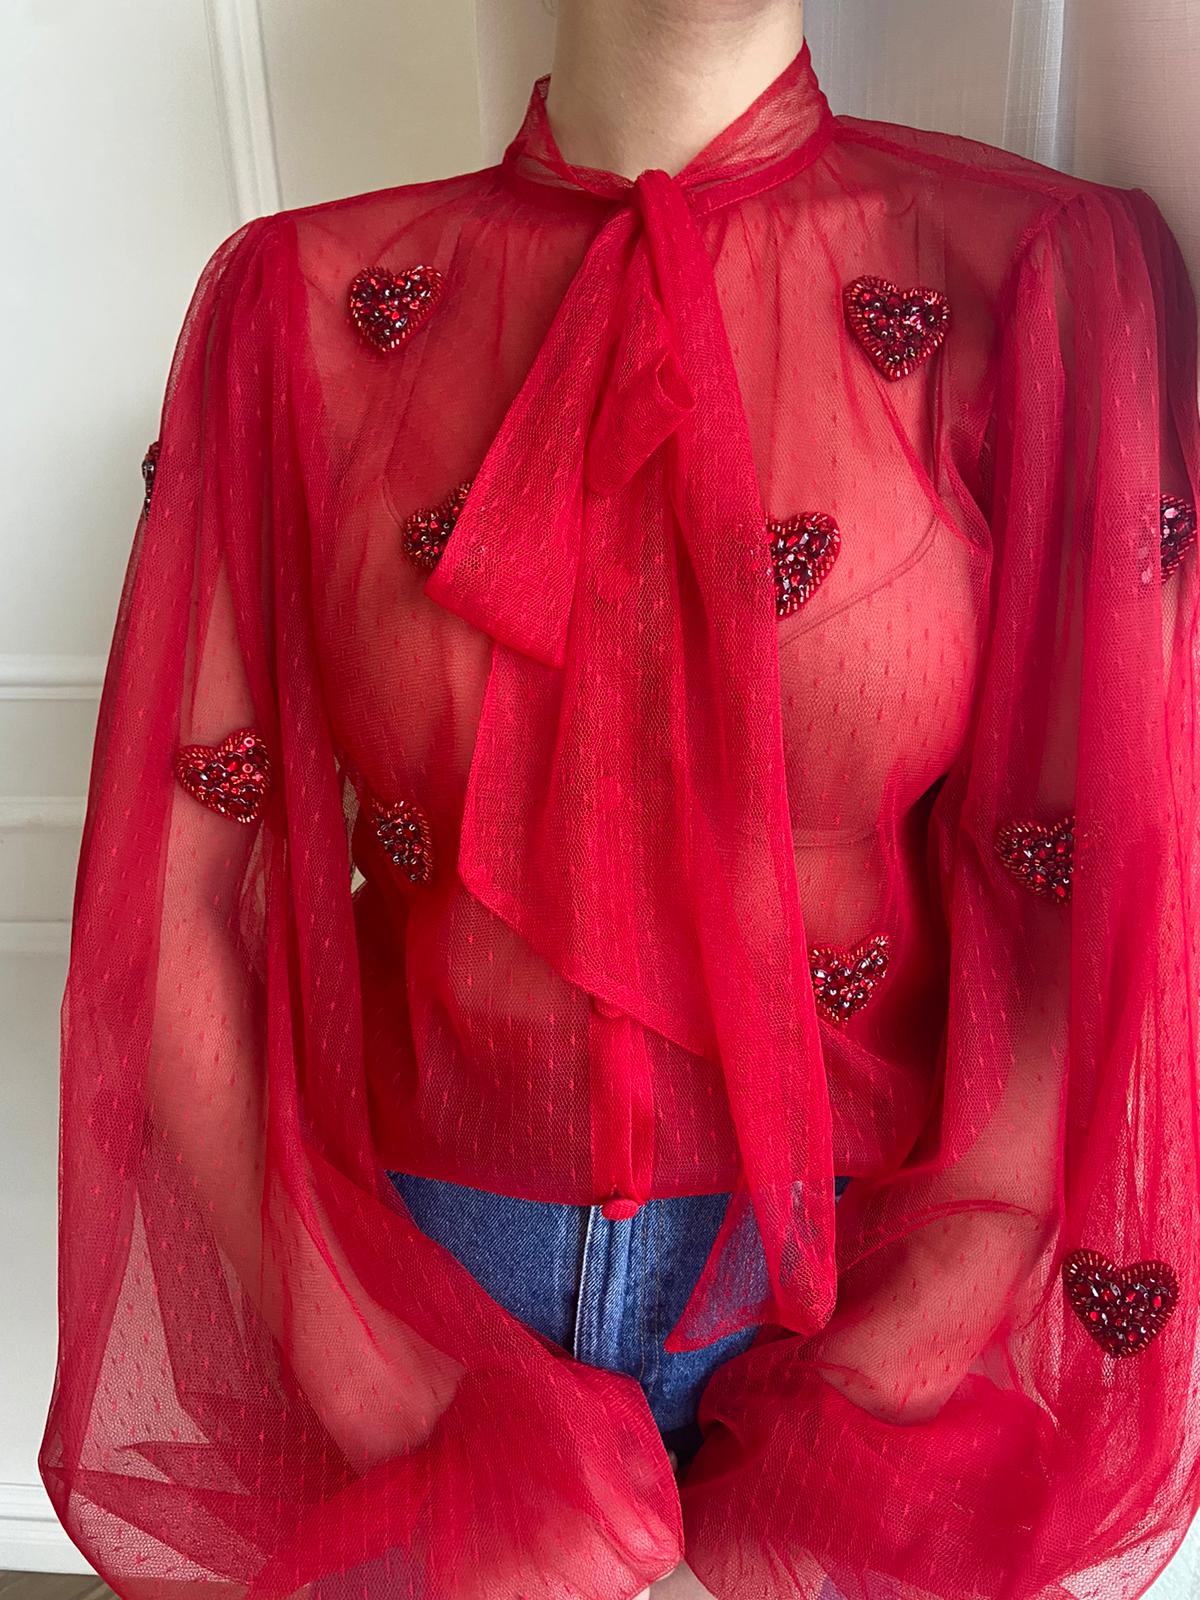 Red blouse with embroidered hearts